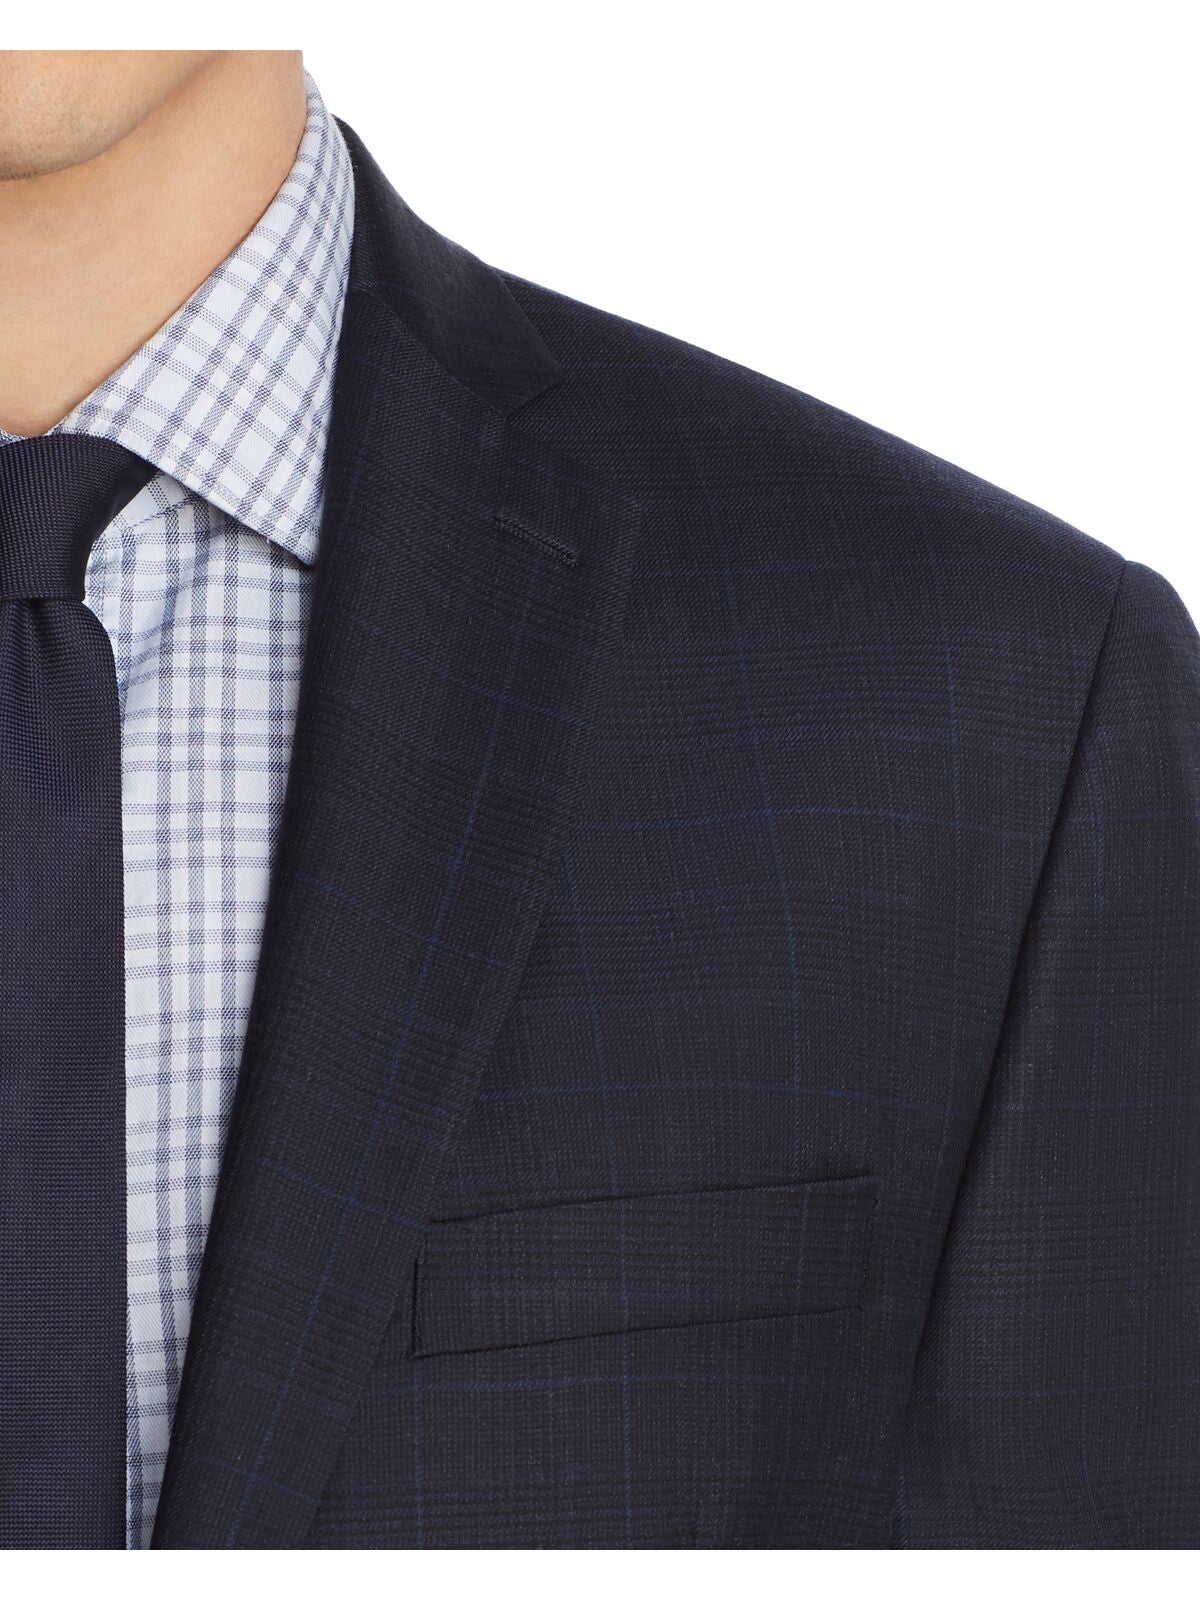 MICHAEL KORS Mens Navy Single Breasted, Windowpane Plaid Classic Fit Suit Separate Blazer Jacket 38R